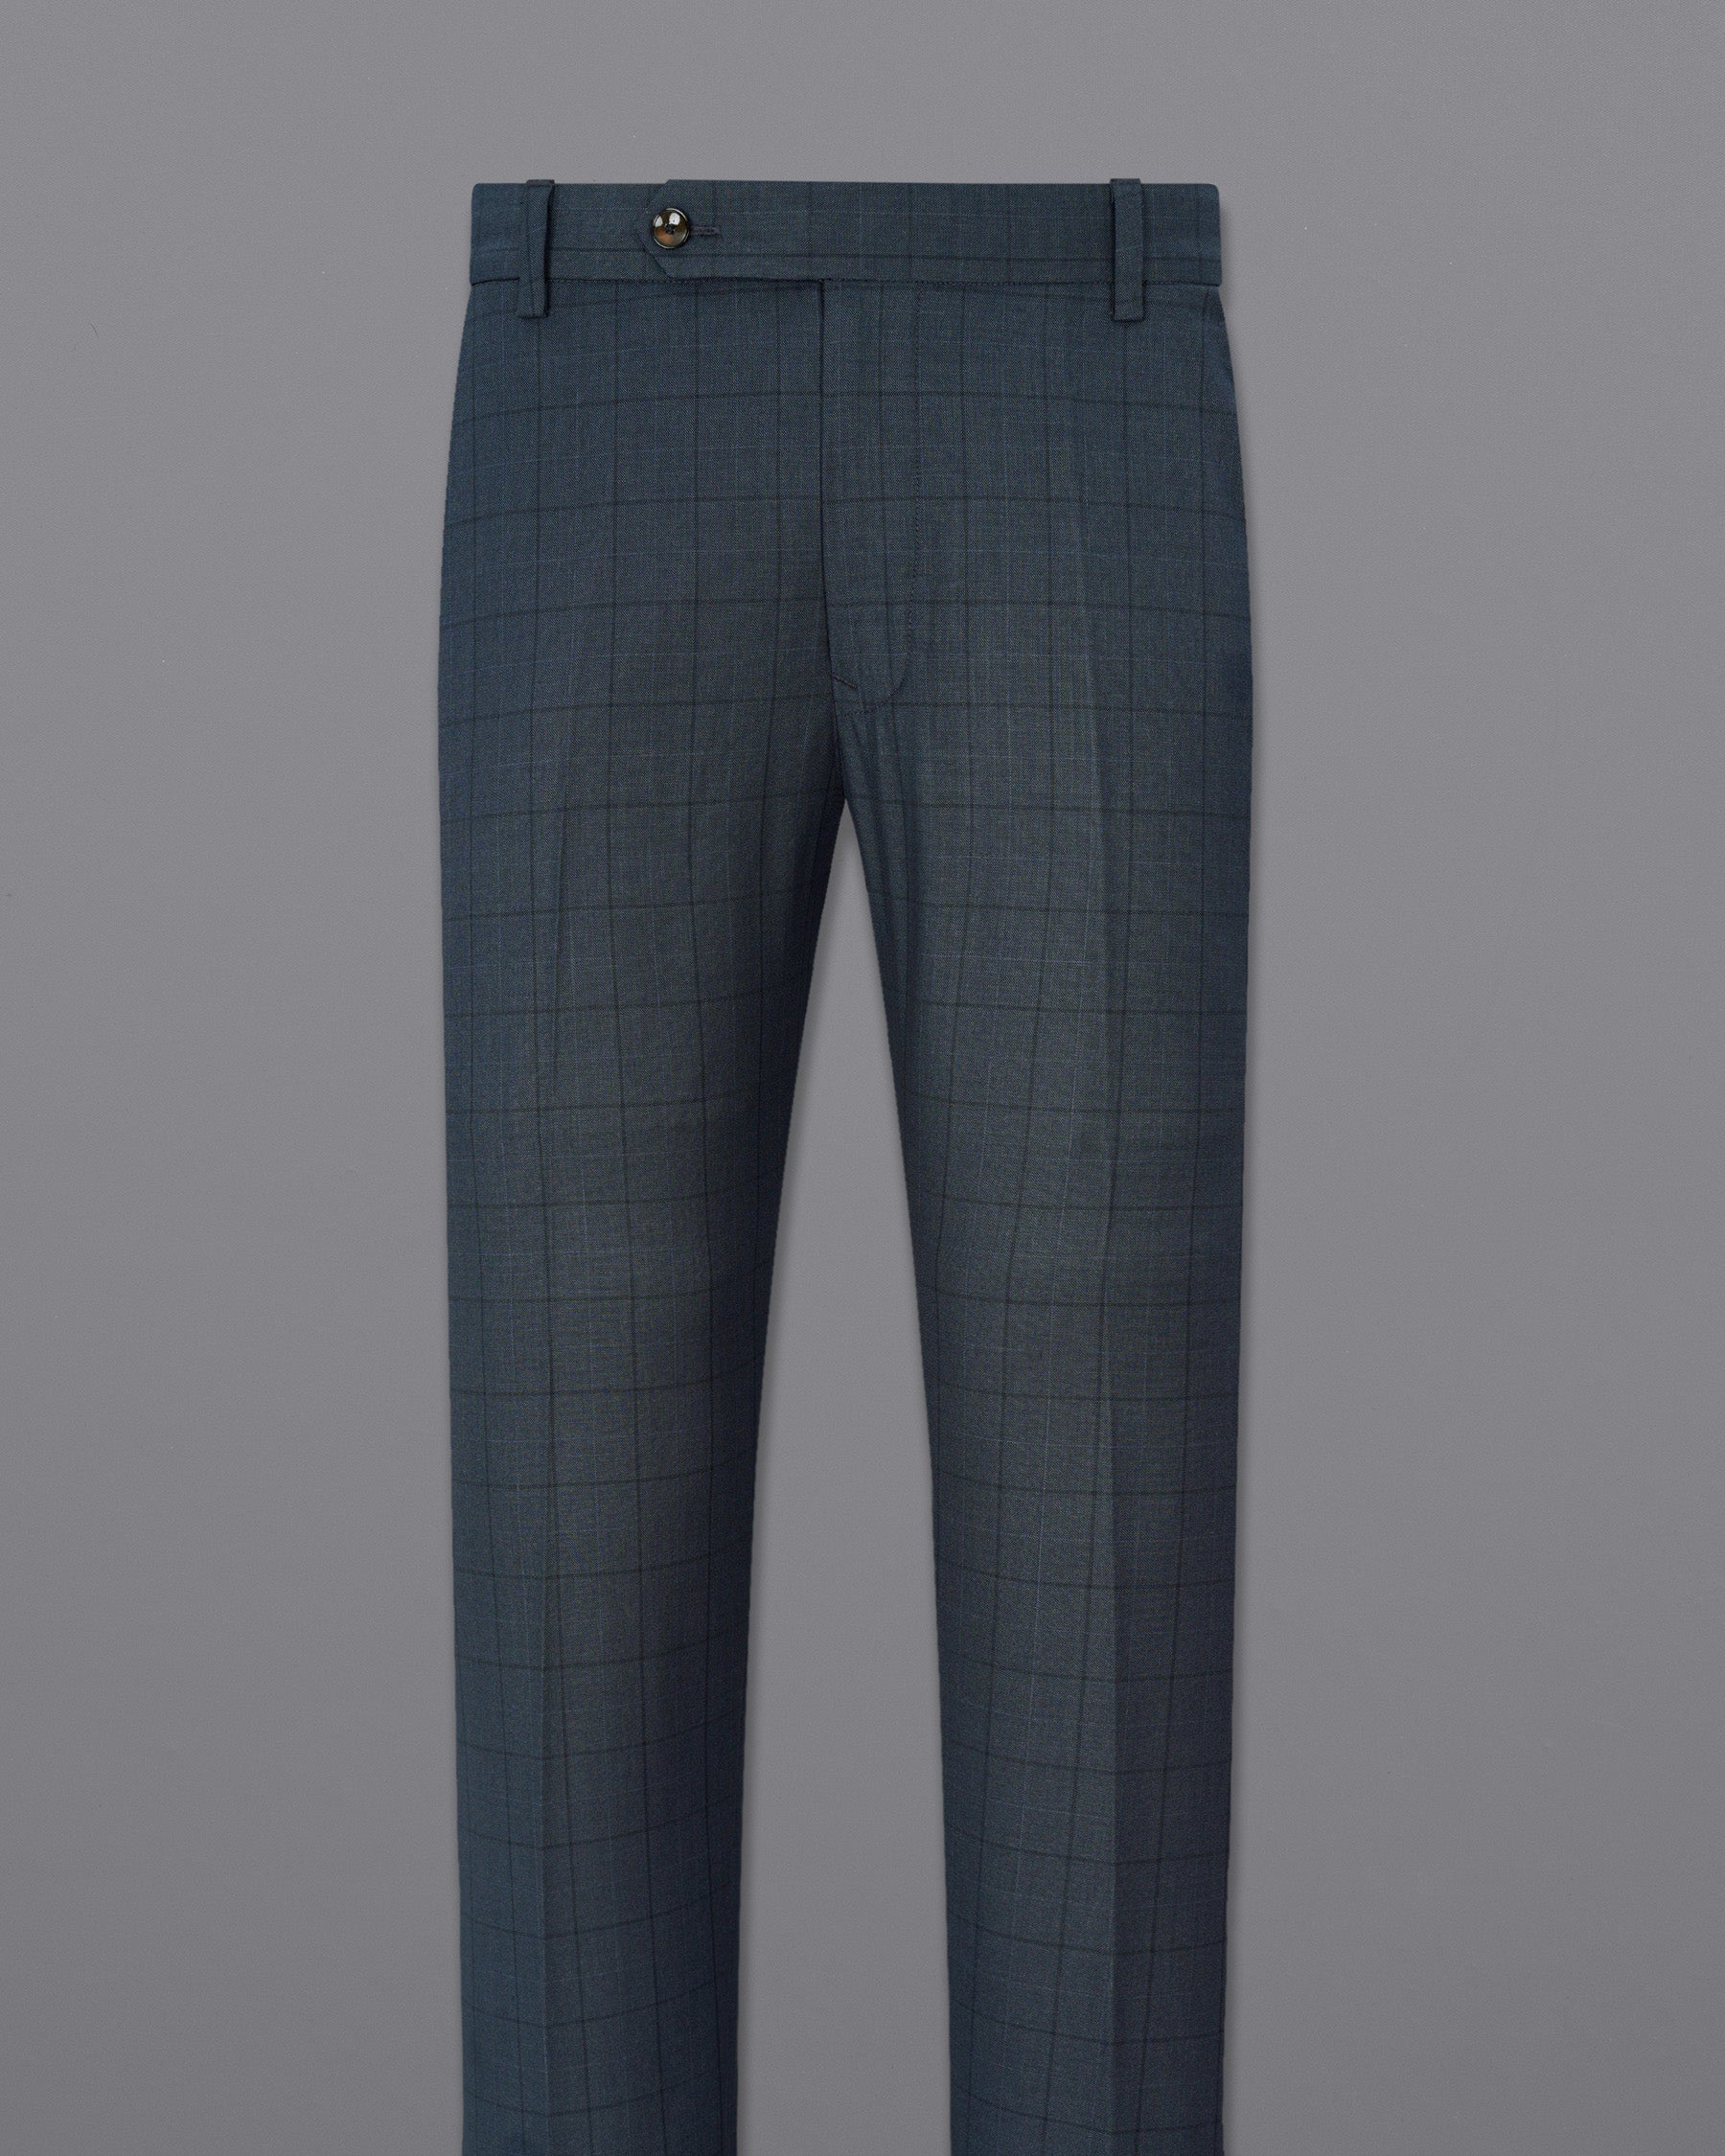 lridium with mirage plaid Windowpane Double Breasted Suit